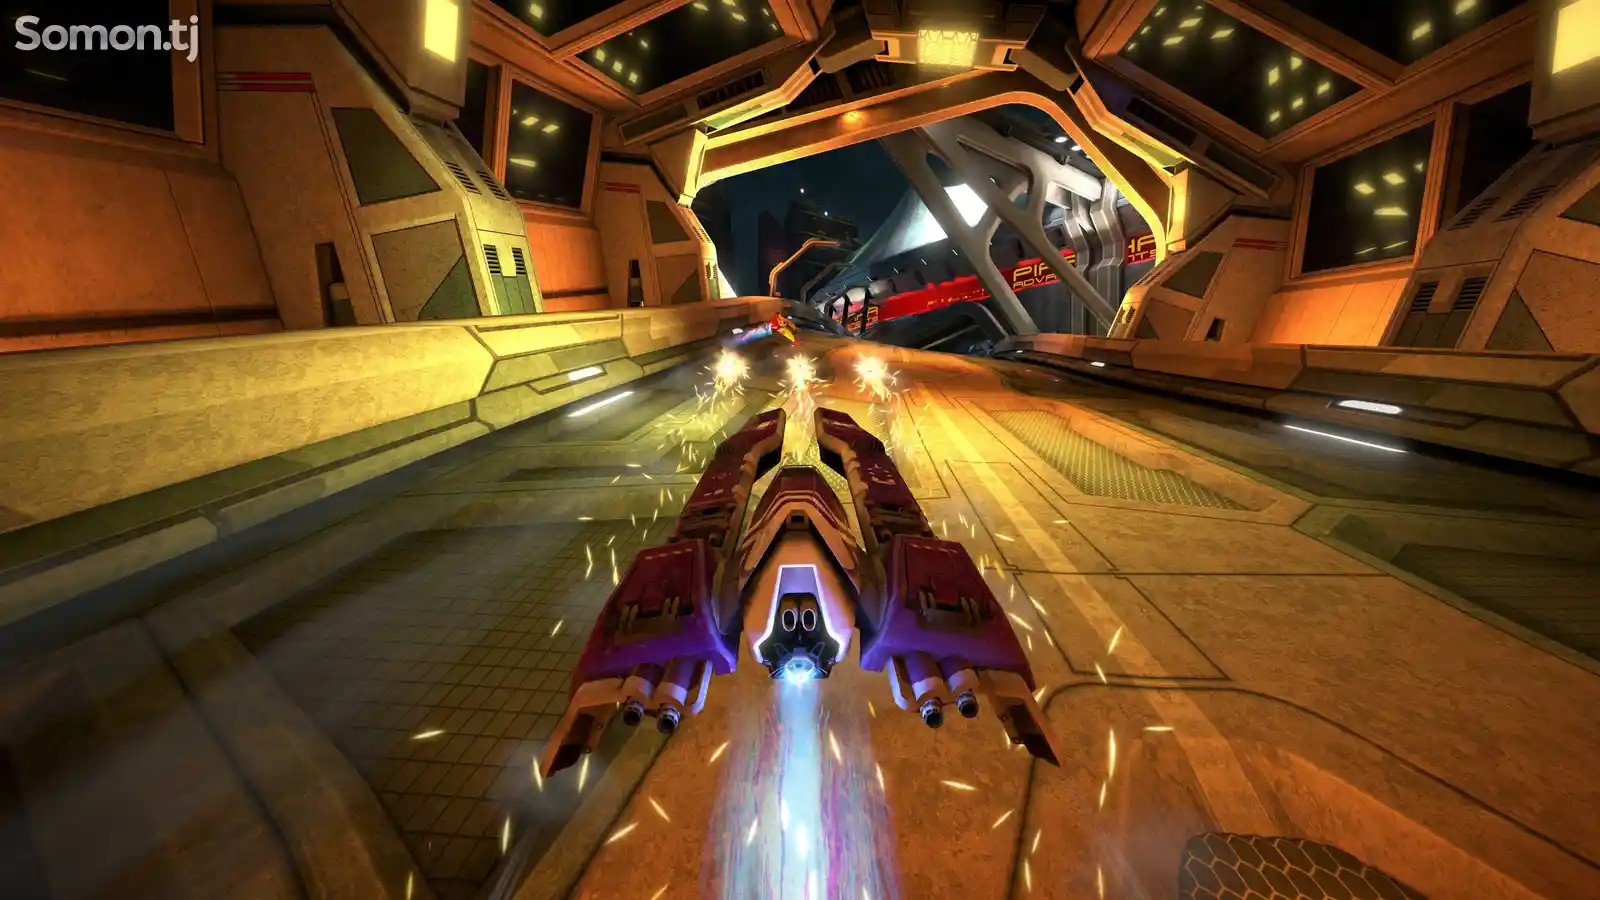 Игра Wipeout omega collection для PS-4 / 5.05 / 6.72 / 7.02 / 7.55 / 9.00 /-2